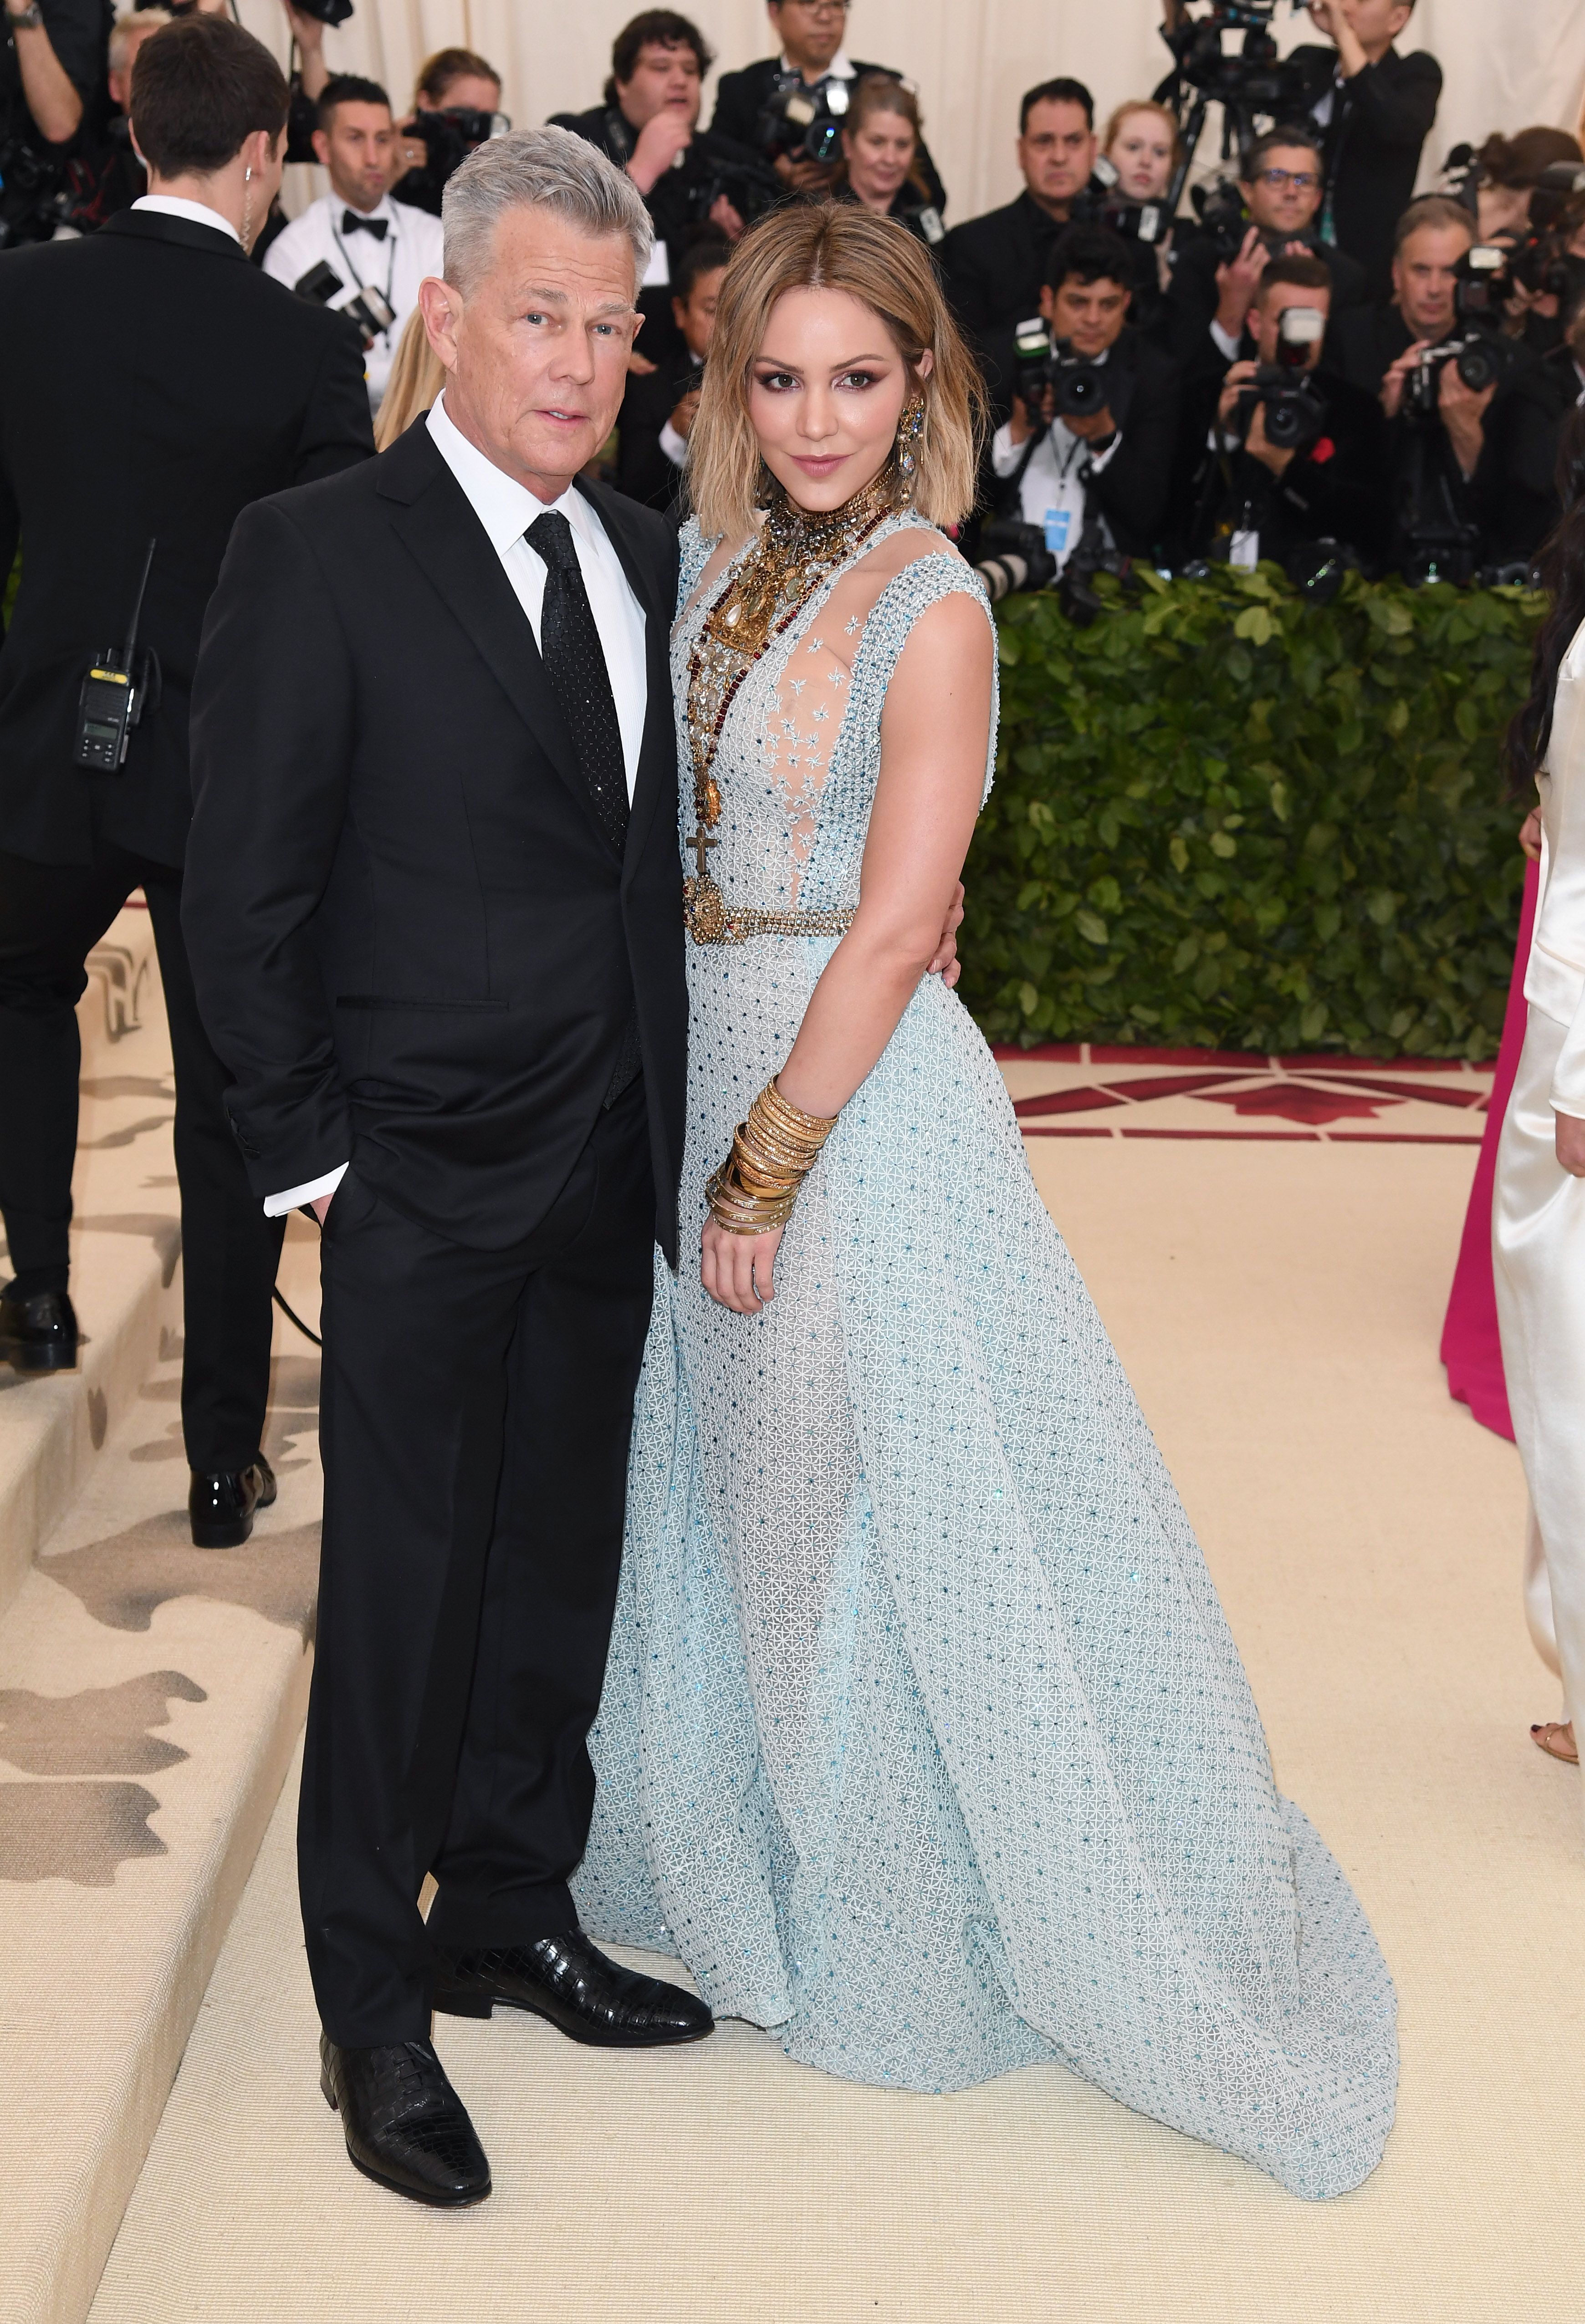 David Foster and Katharine McPhee at Metropolitan Museum of Art on May 7, 2018 in New York City. | Photo: Getty Images